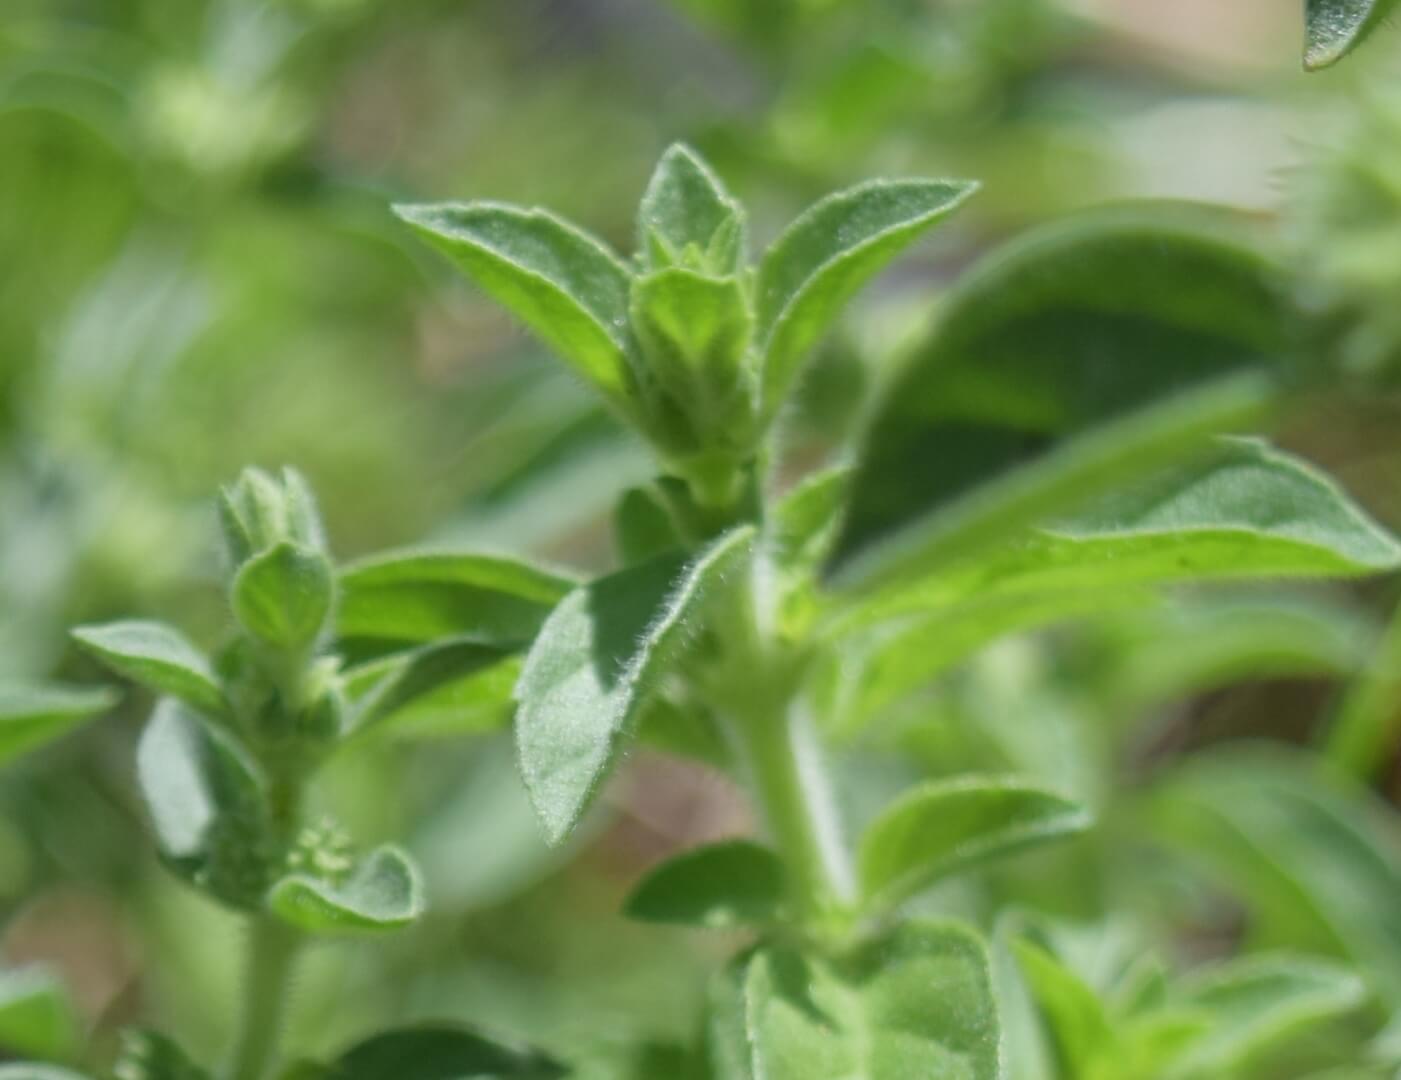 Oregano is another excllent culinary herb full of healing immune boosting compounds. Pungent and delicious, it is also very easy to grow.